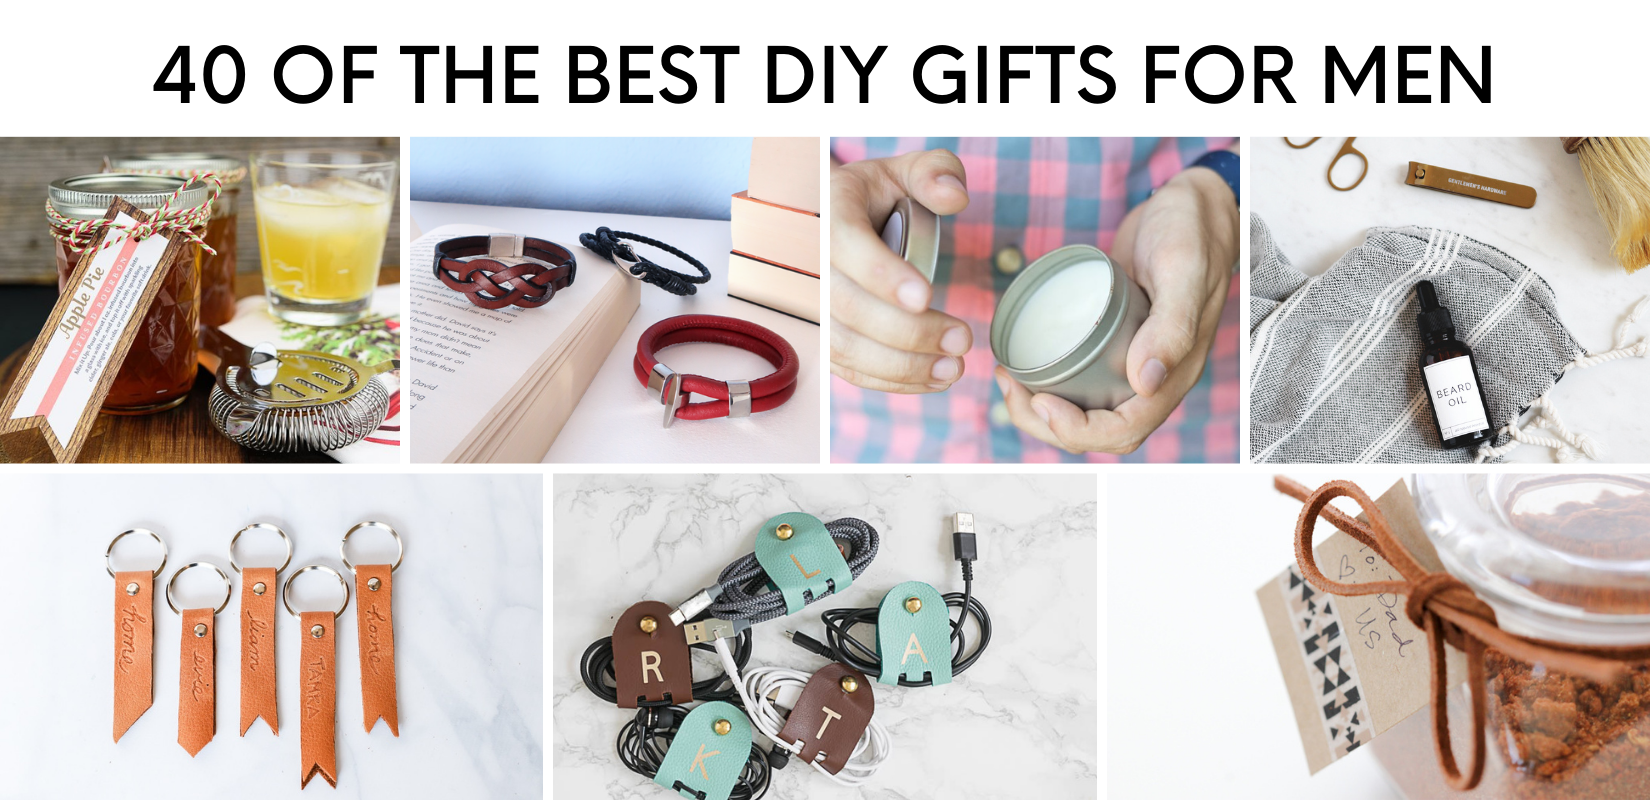 40 of the Best DIY Gifts for Men